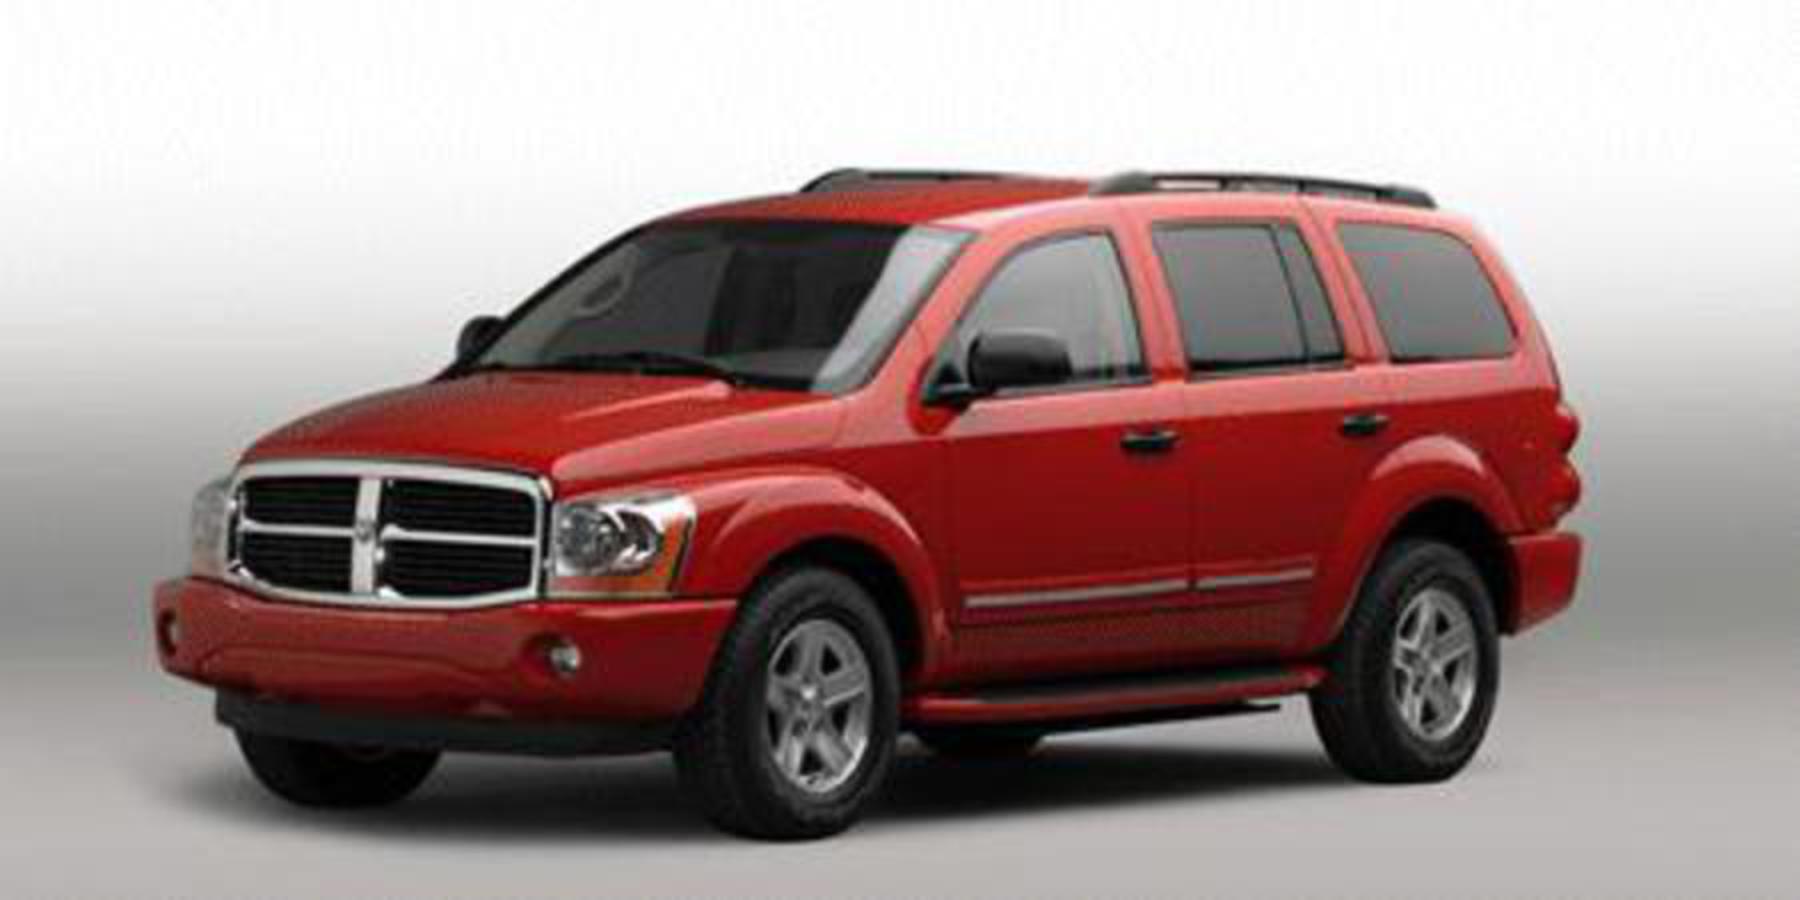 I have owned my Dodge Durango Limited Hemi since 2005. As of this date,